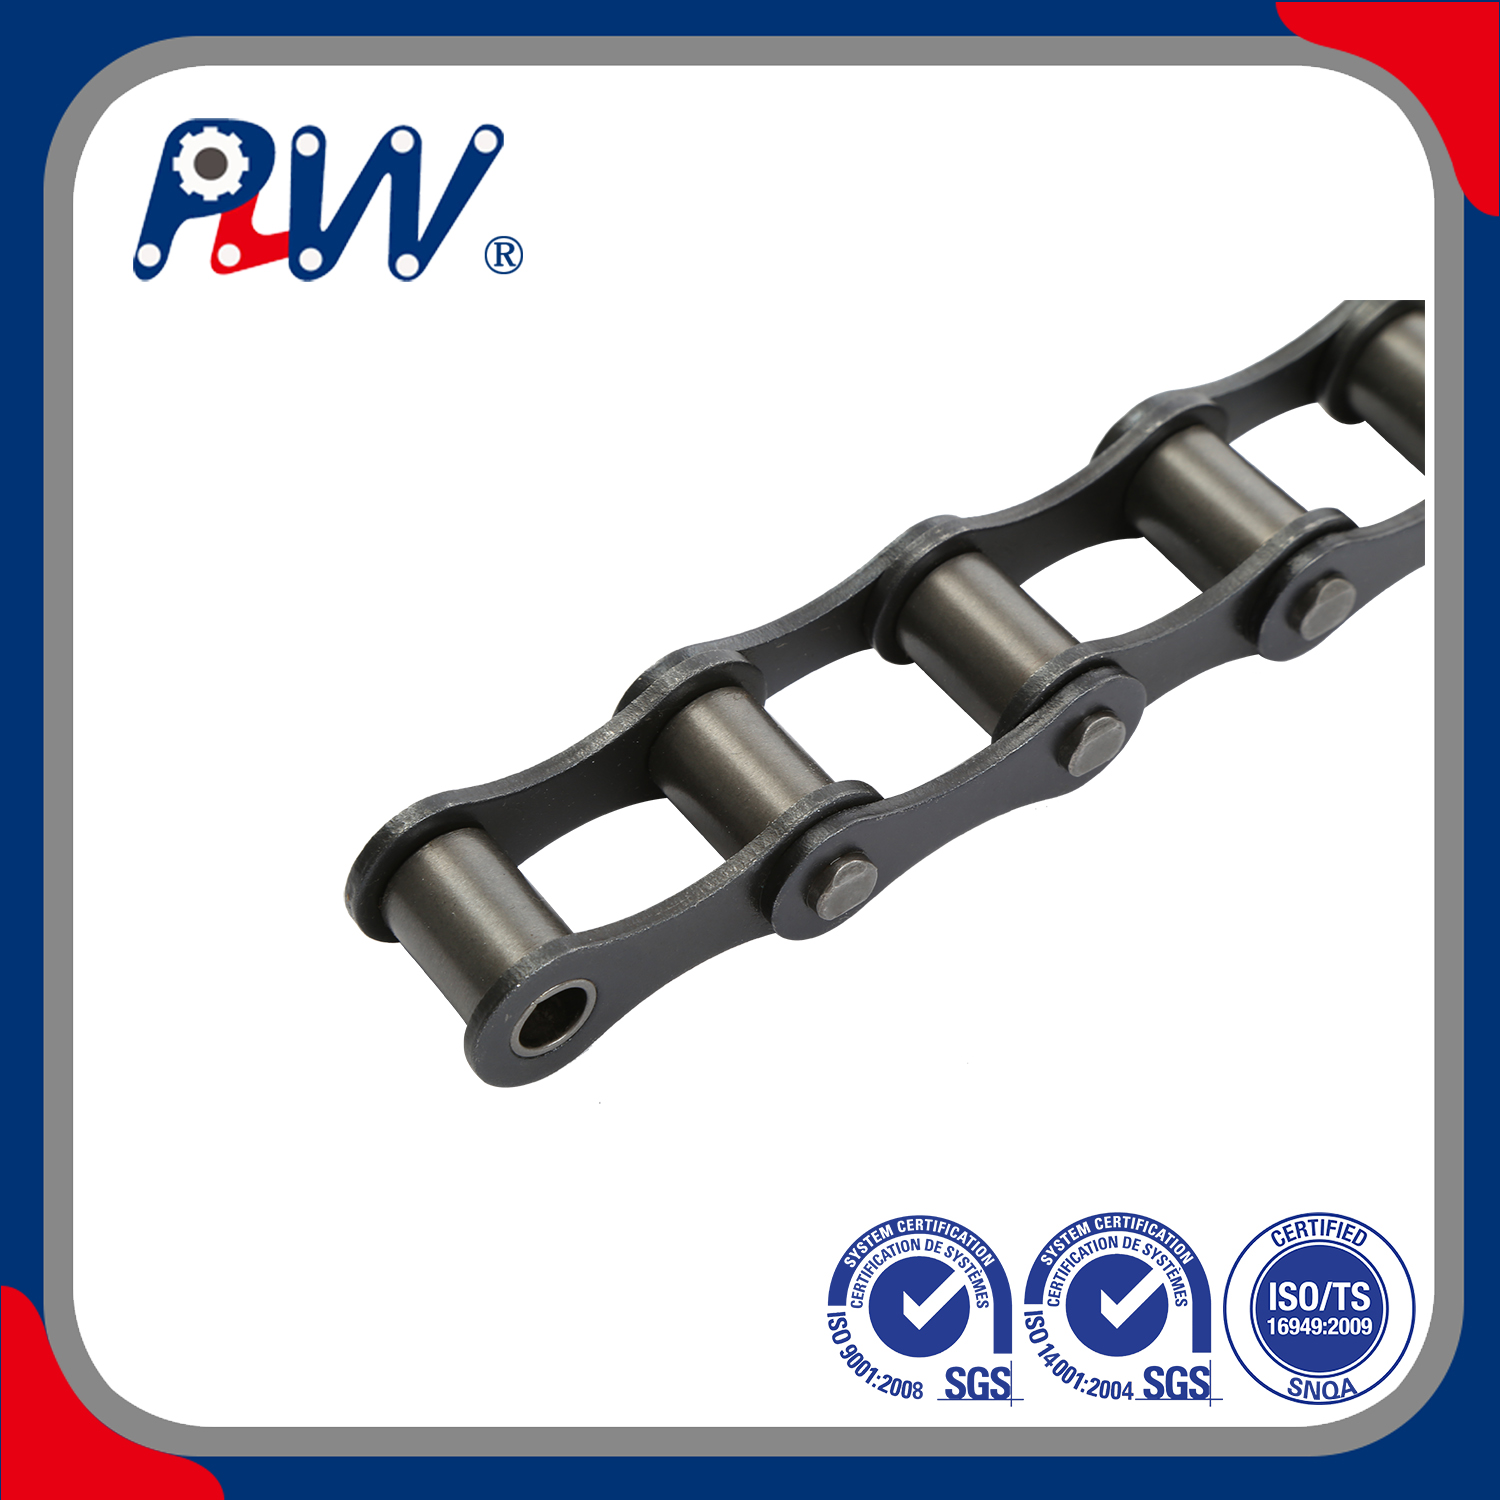 DIN/ISO Double Pitch Transmission Chain 